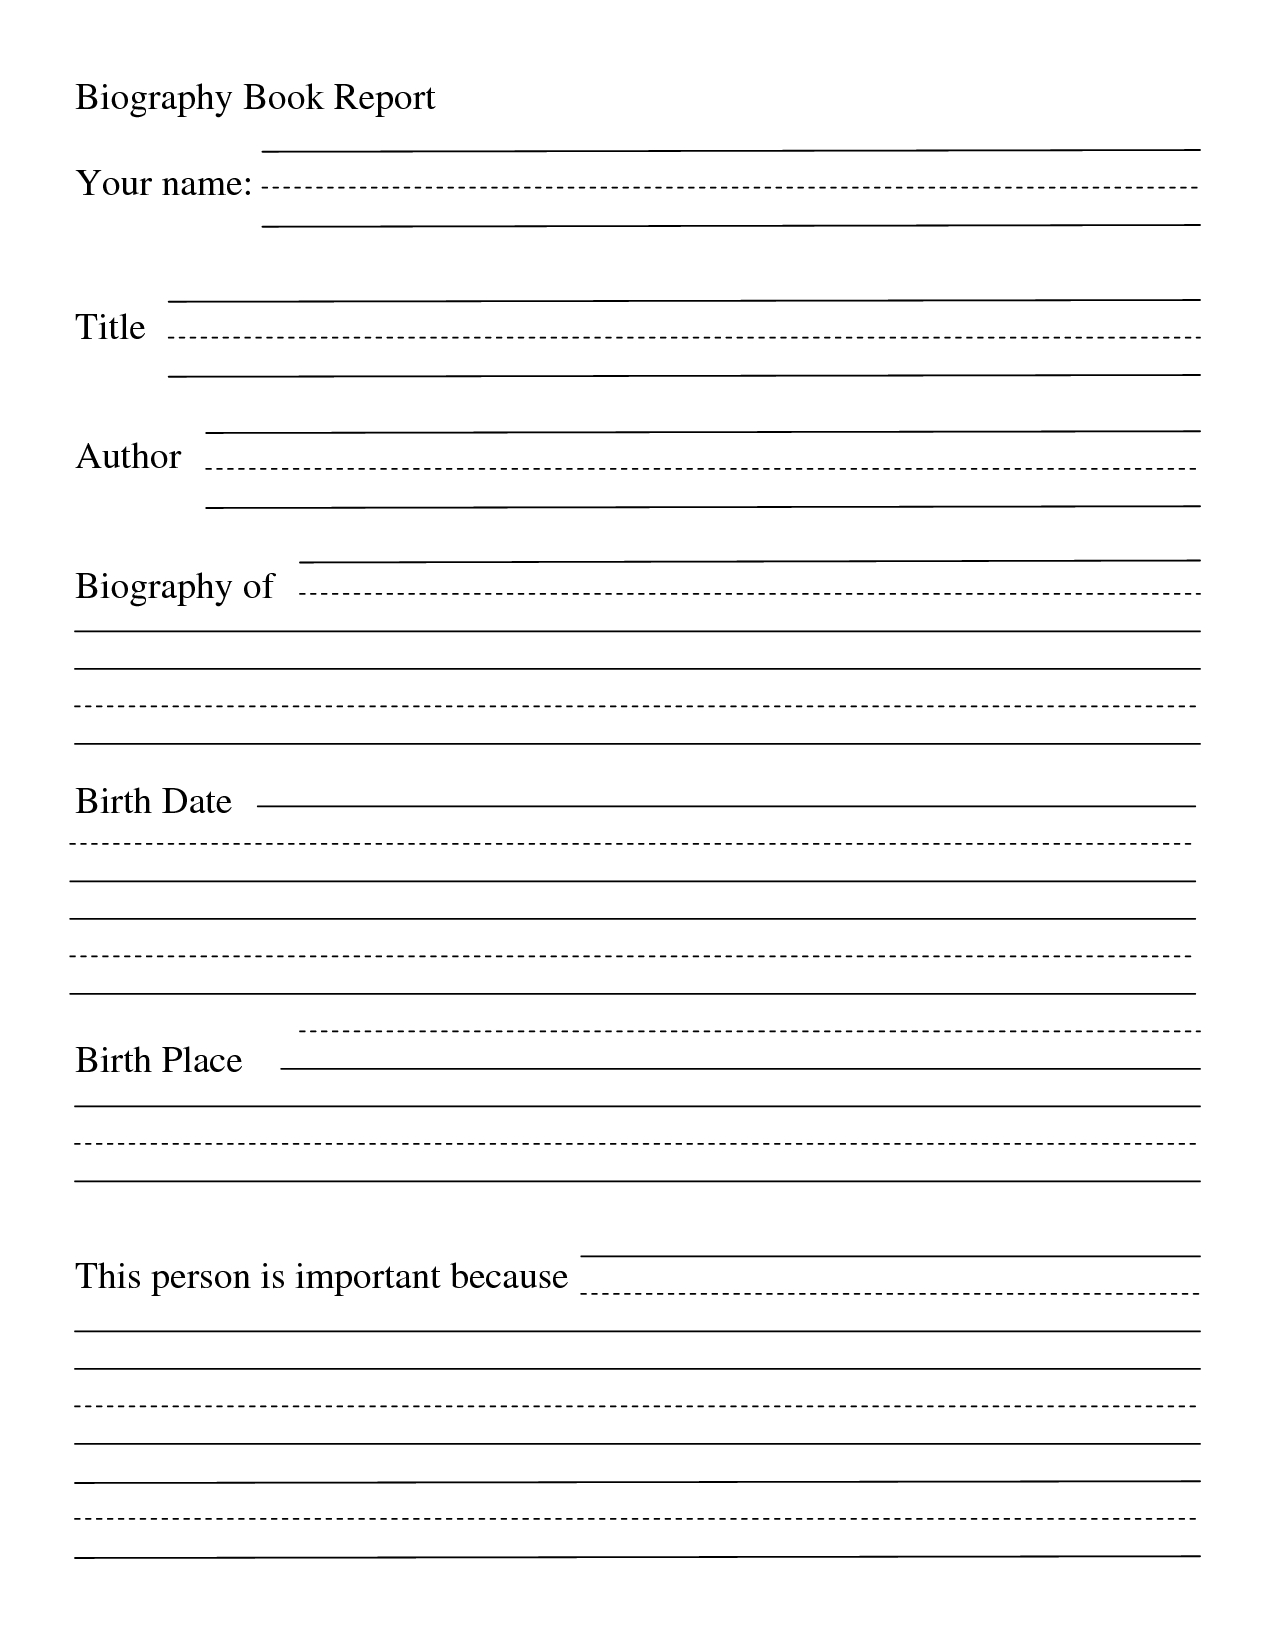 004 Biography Book Report Template Formidable Ideas Pdf High Inside Biography Book Report Template